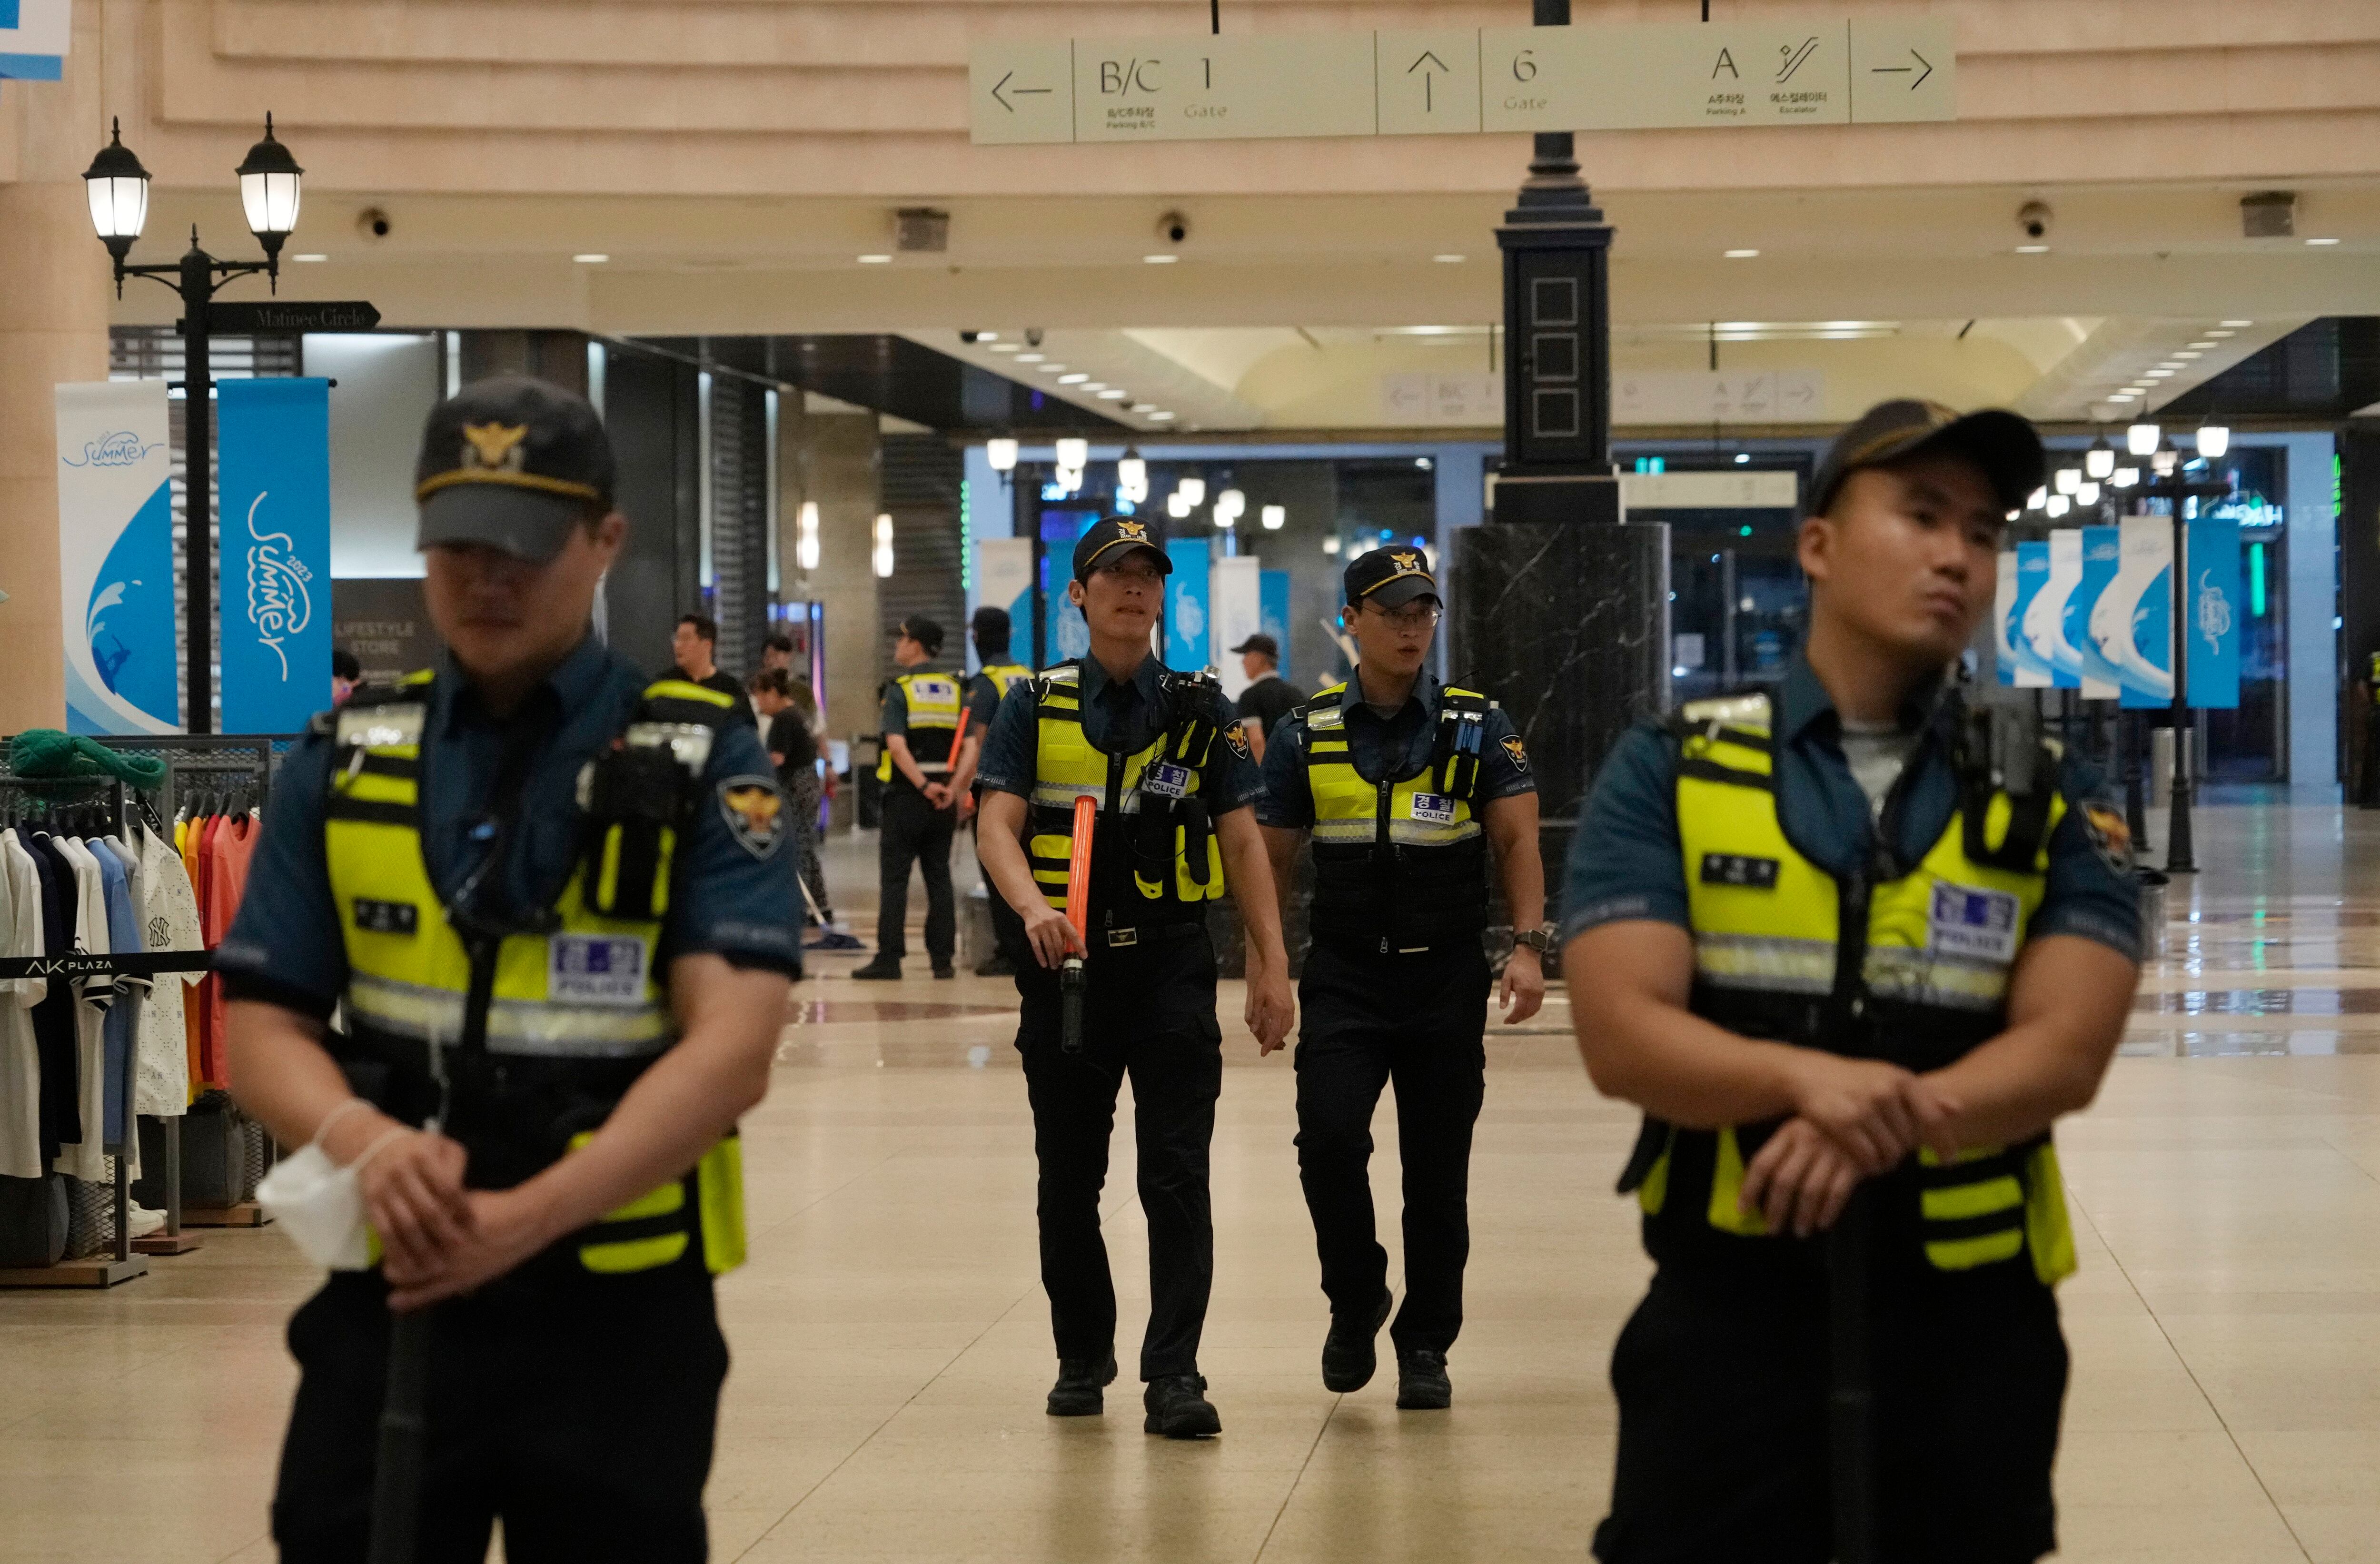 South Korean police pursue suspect in 2nd stabbing attack in 2 days